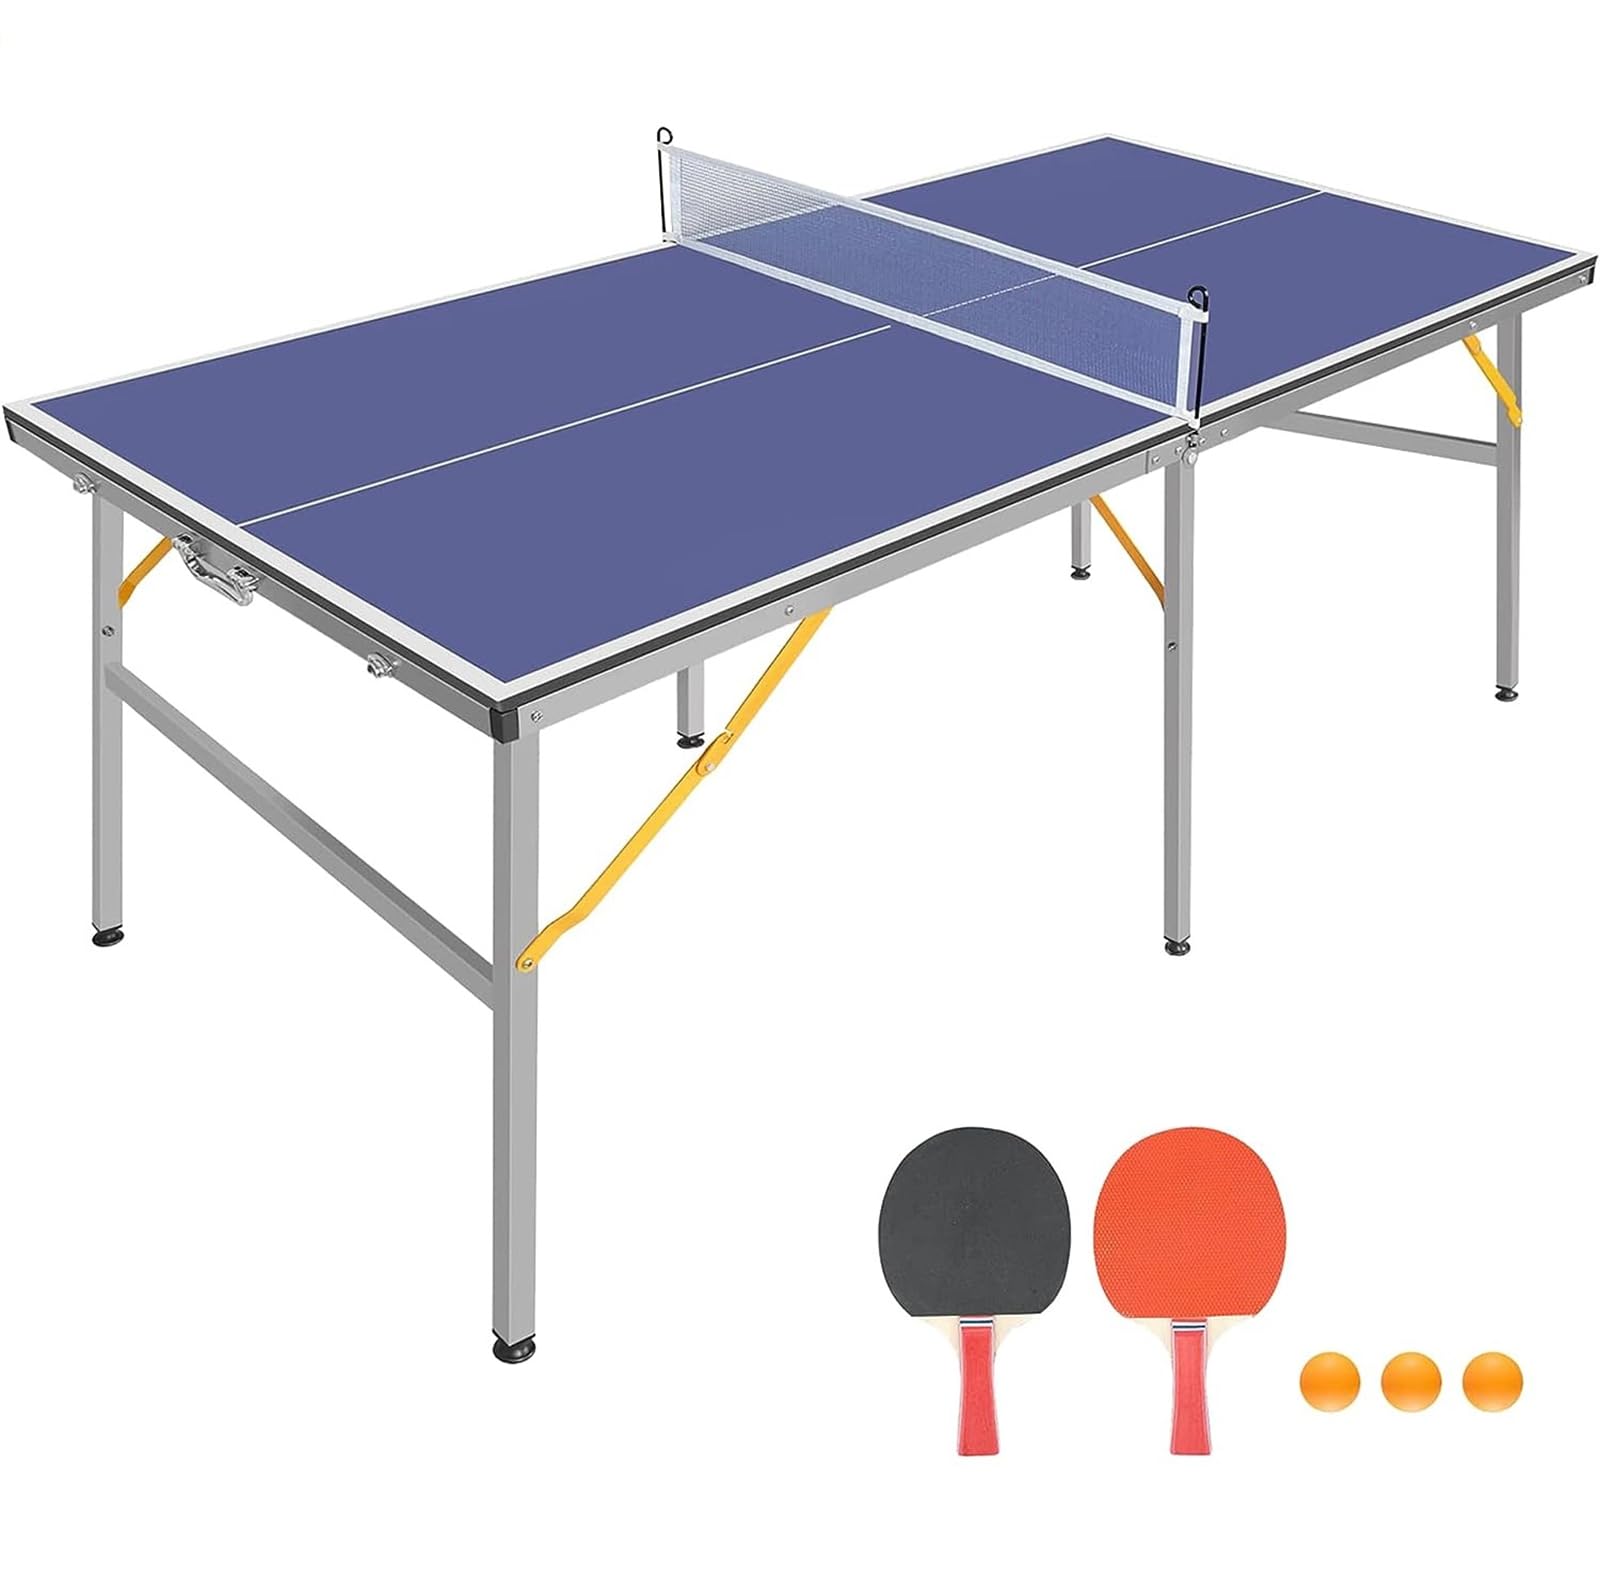 Mid-Size Table Tennis Table Foldable & Portable 6ft Ping Pong Table Set for Indoor & Outdoor Games with Net, 2 Table Tennis Paddles and 3 Balls